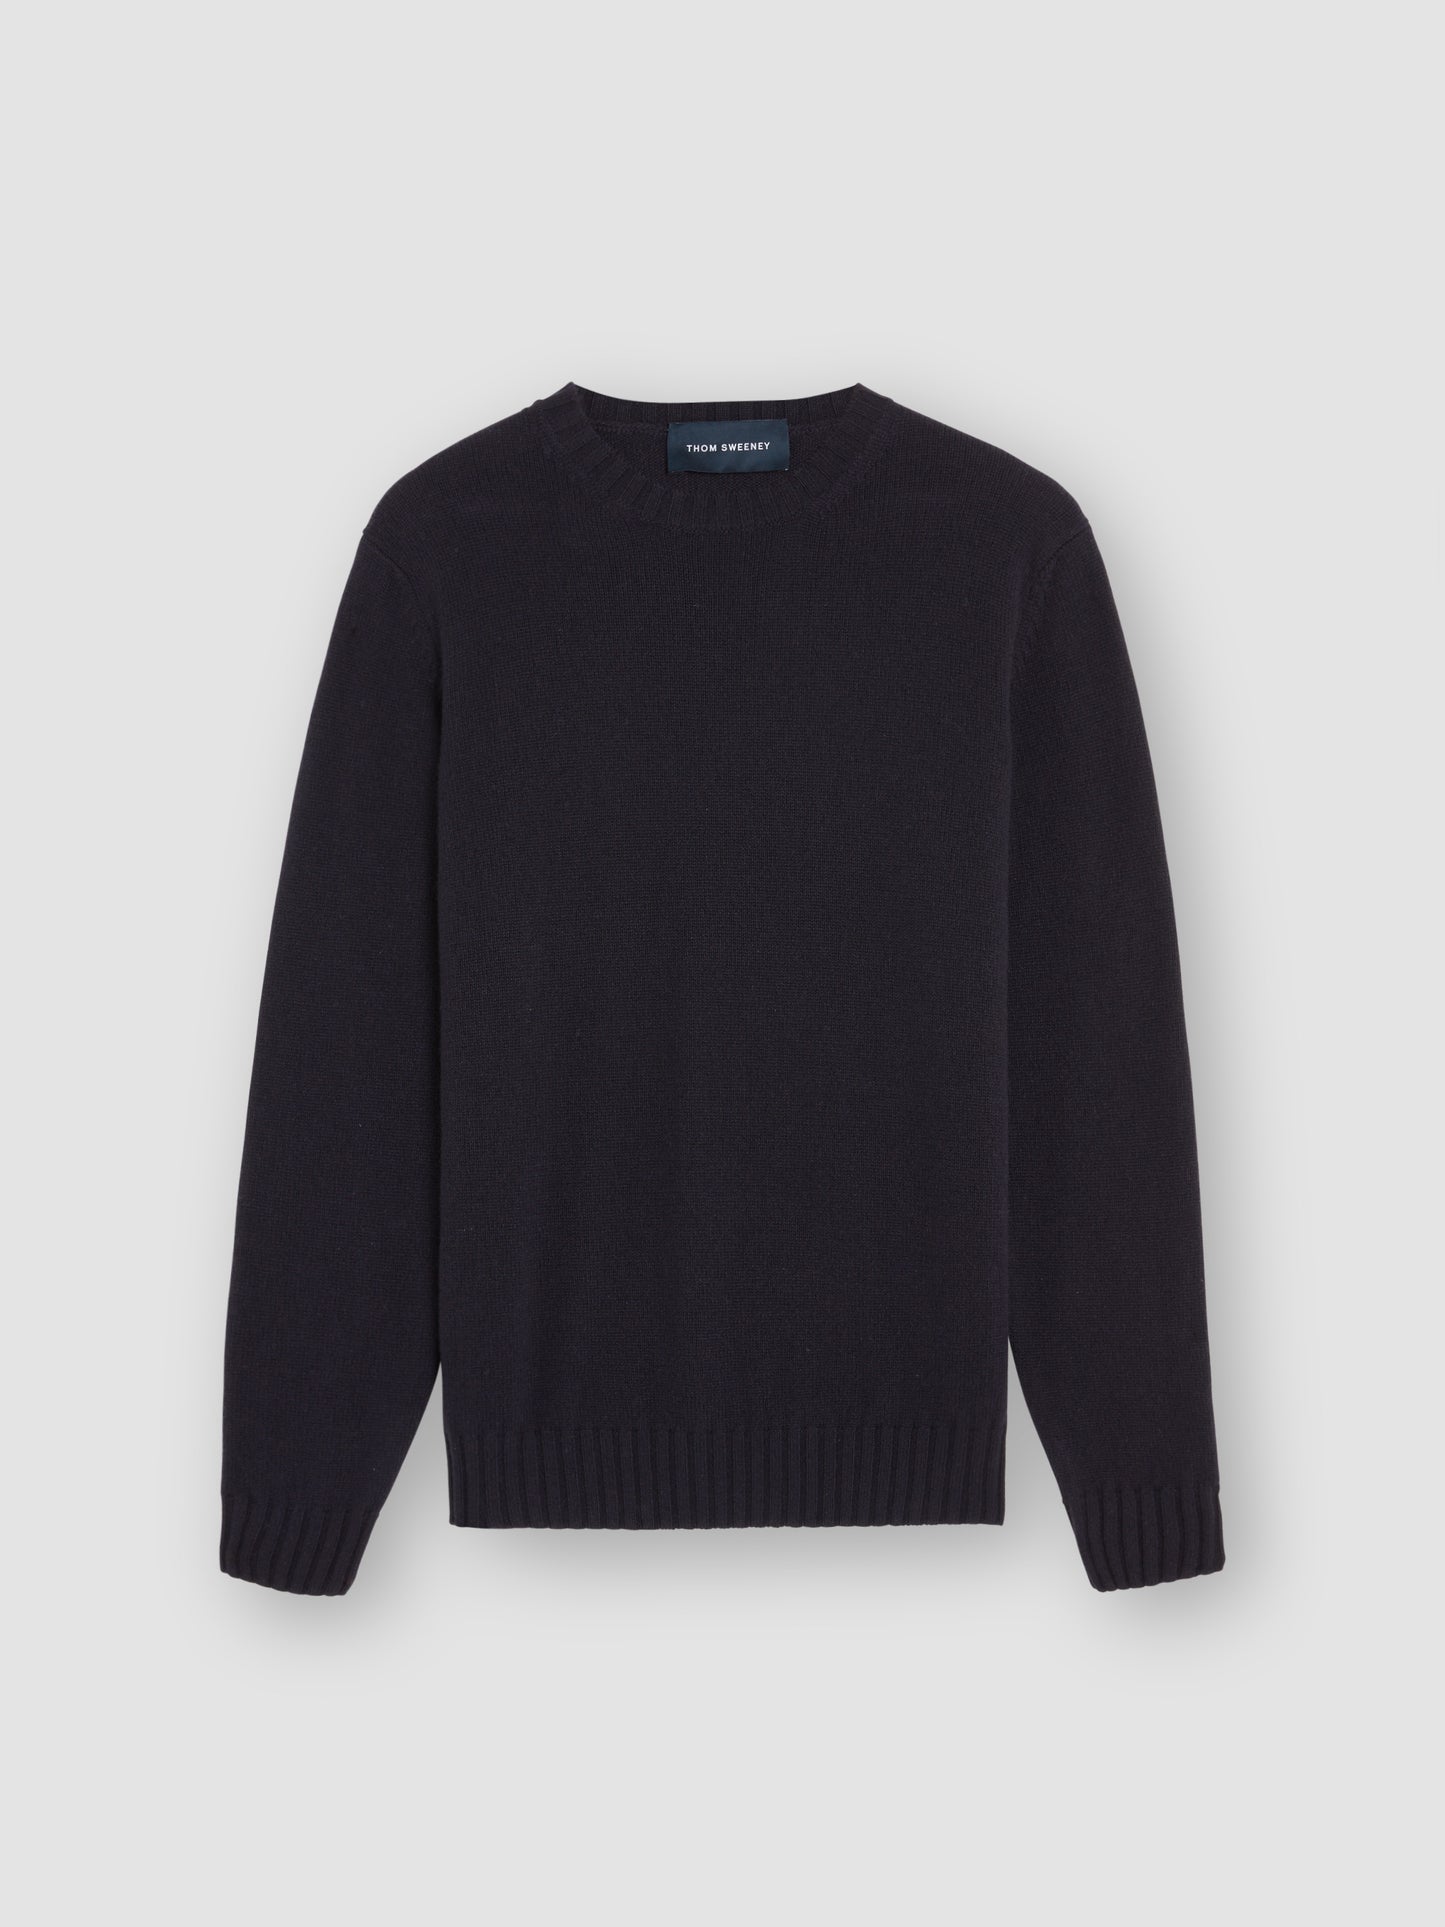 Cashmere Crew Neck Sweater Navy Product Image